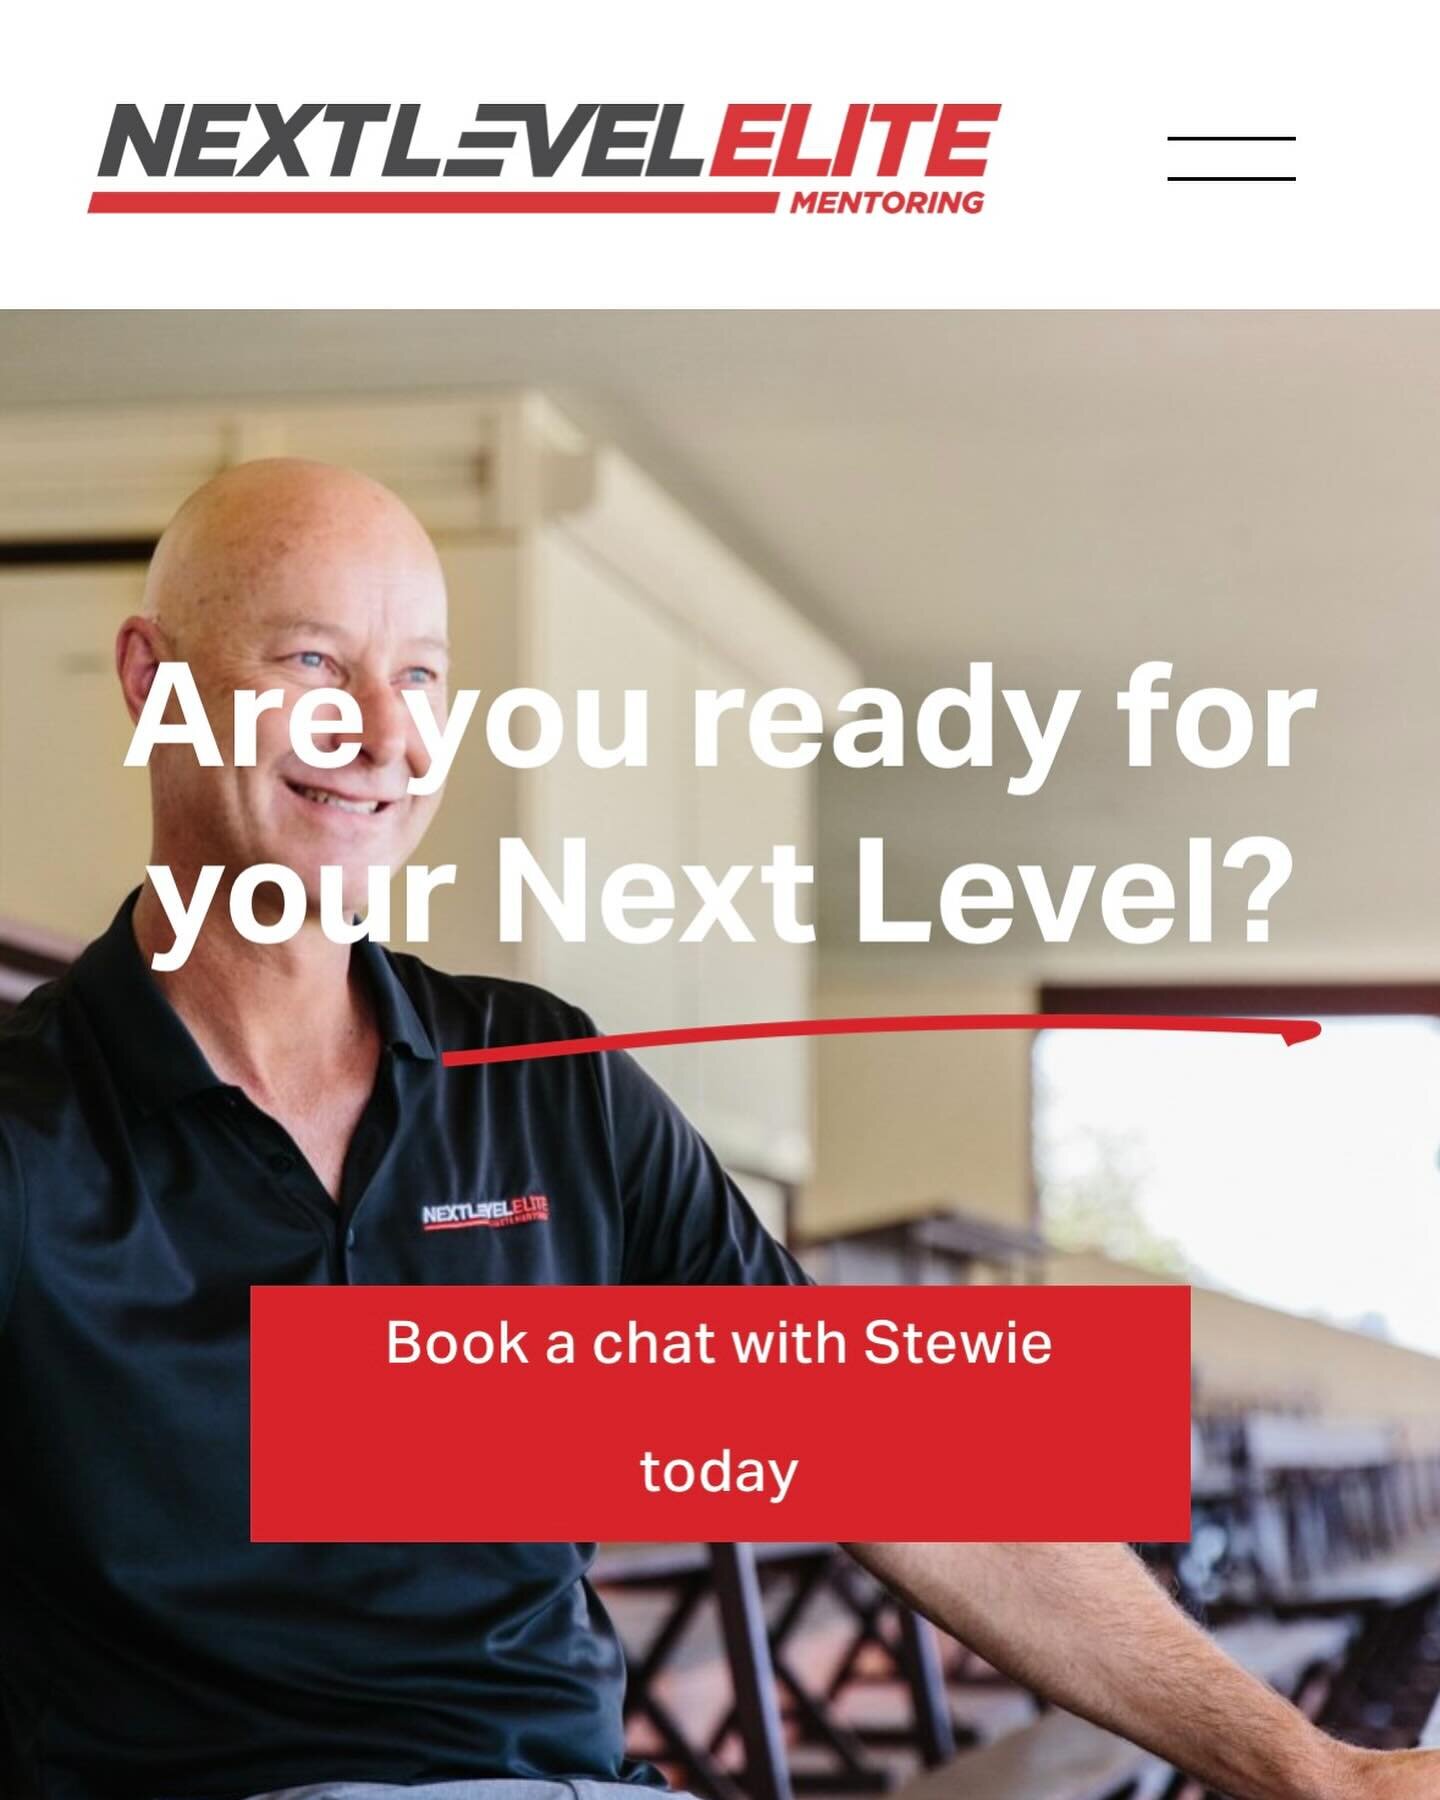 New Year&hellip;&hellip;New Goals
Considering some guidance???
Let&rsquo;s have a Stewie chat.
Book a time online
https://www.nextlevelelite.com.au/